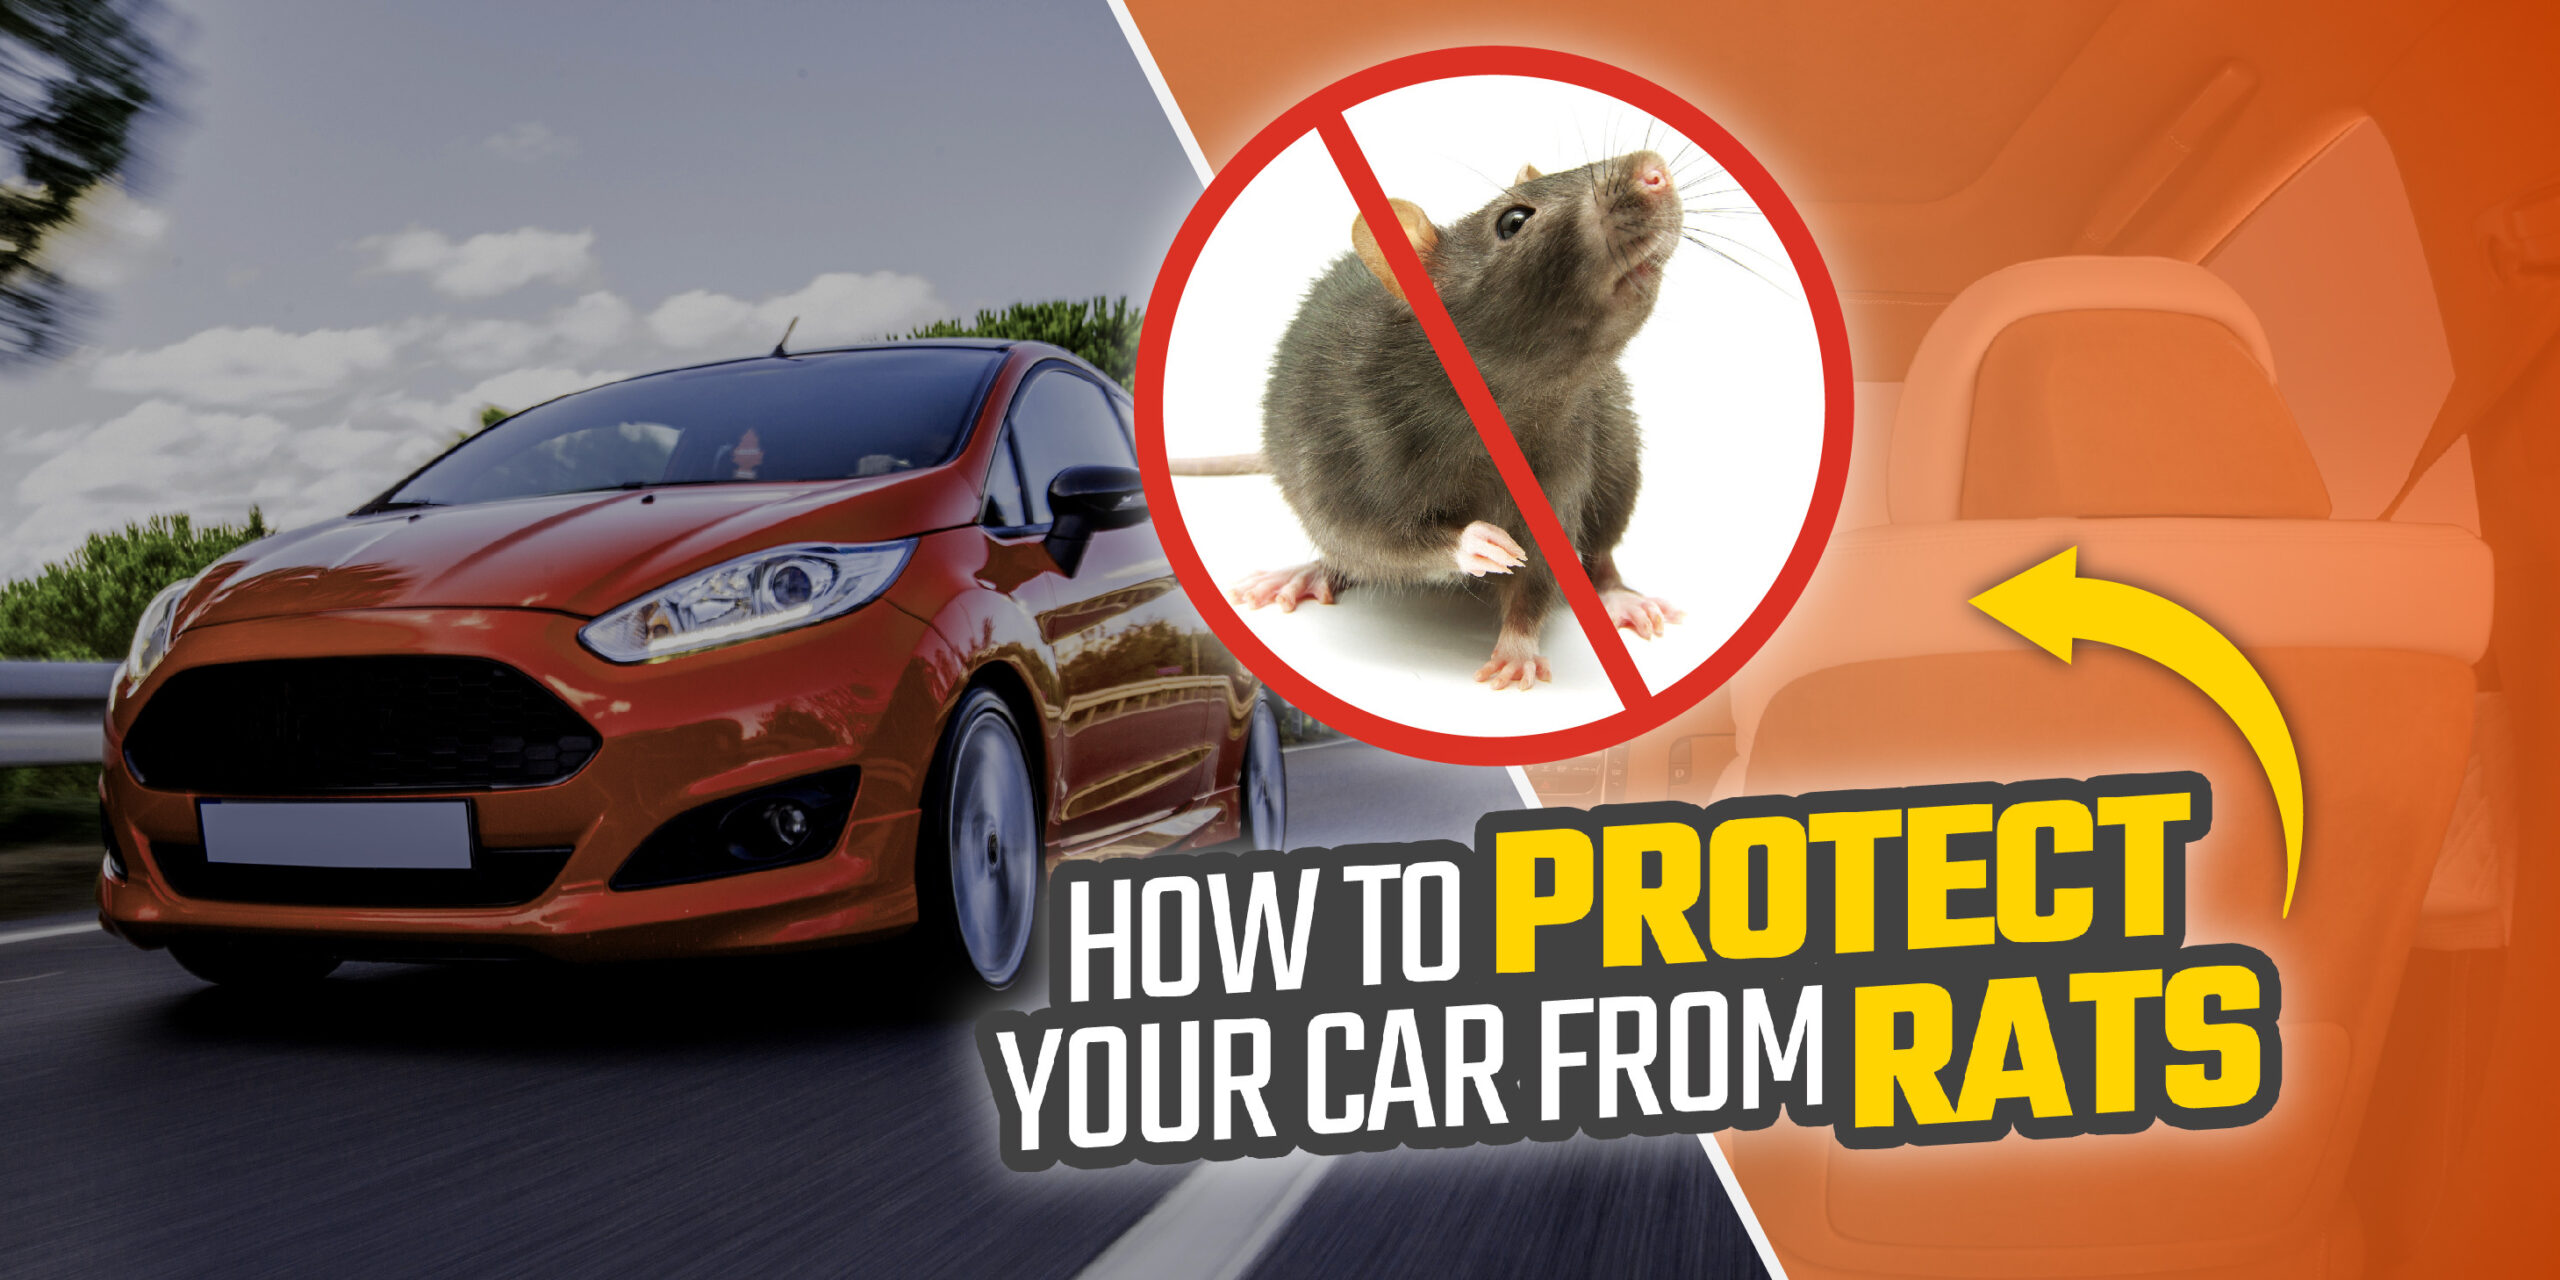 How to Protect Your Car From Rats